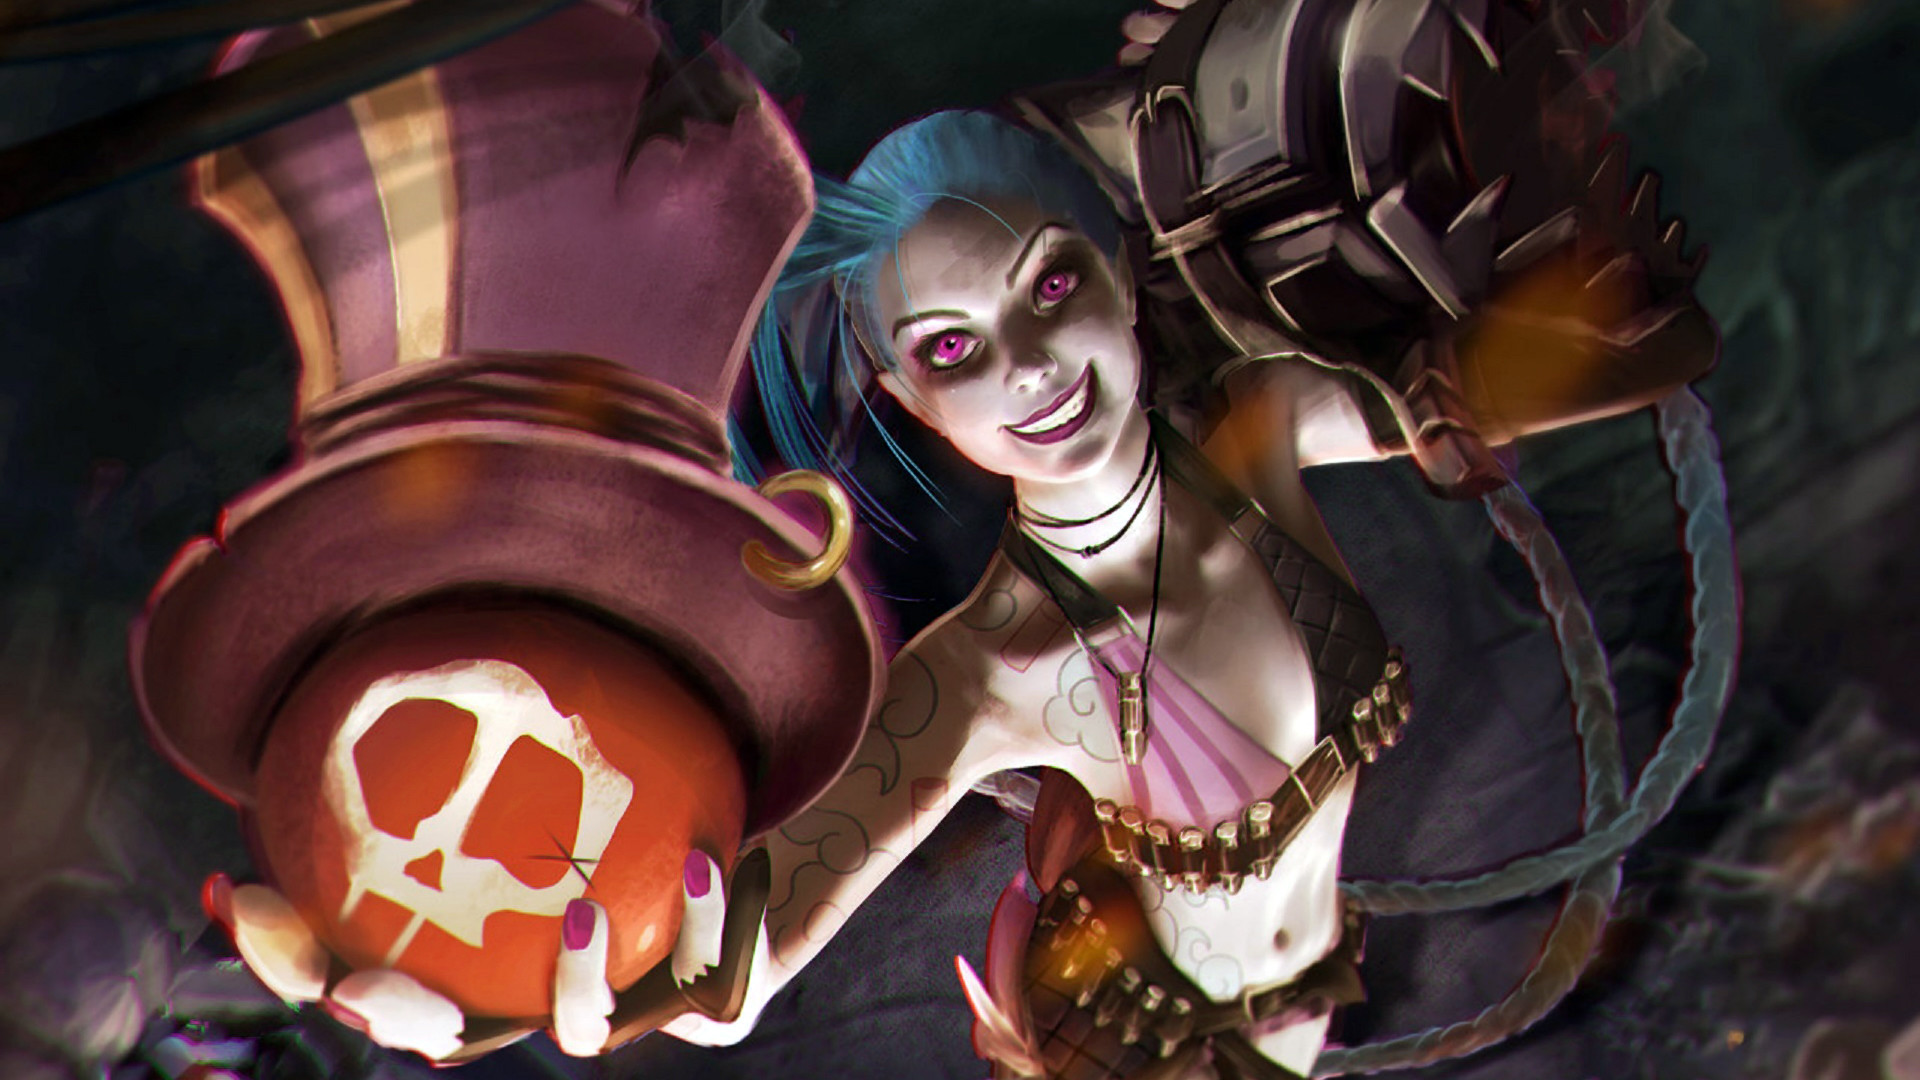 1920x1080 wallpapers jinx lol | jinx bomb girl league of legends game 1080p   hd wallpaper and